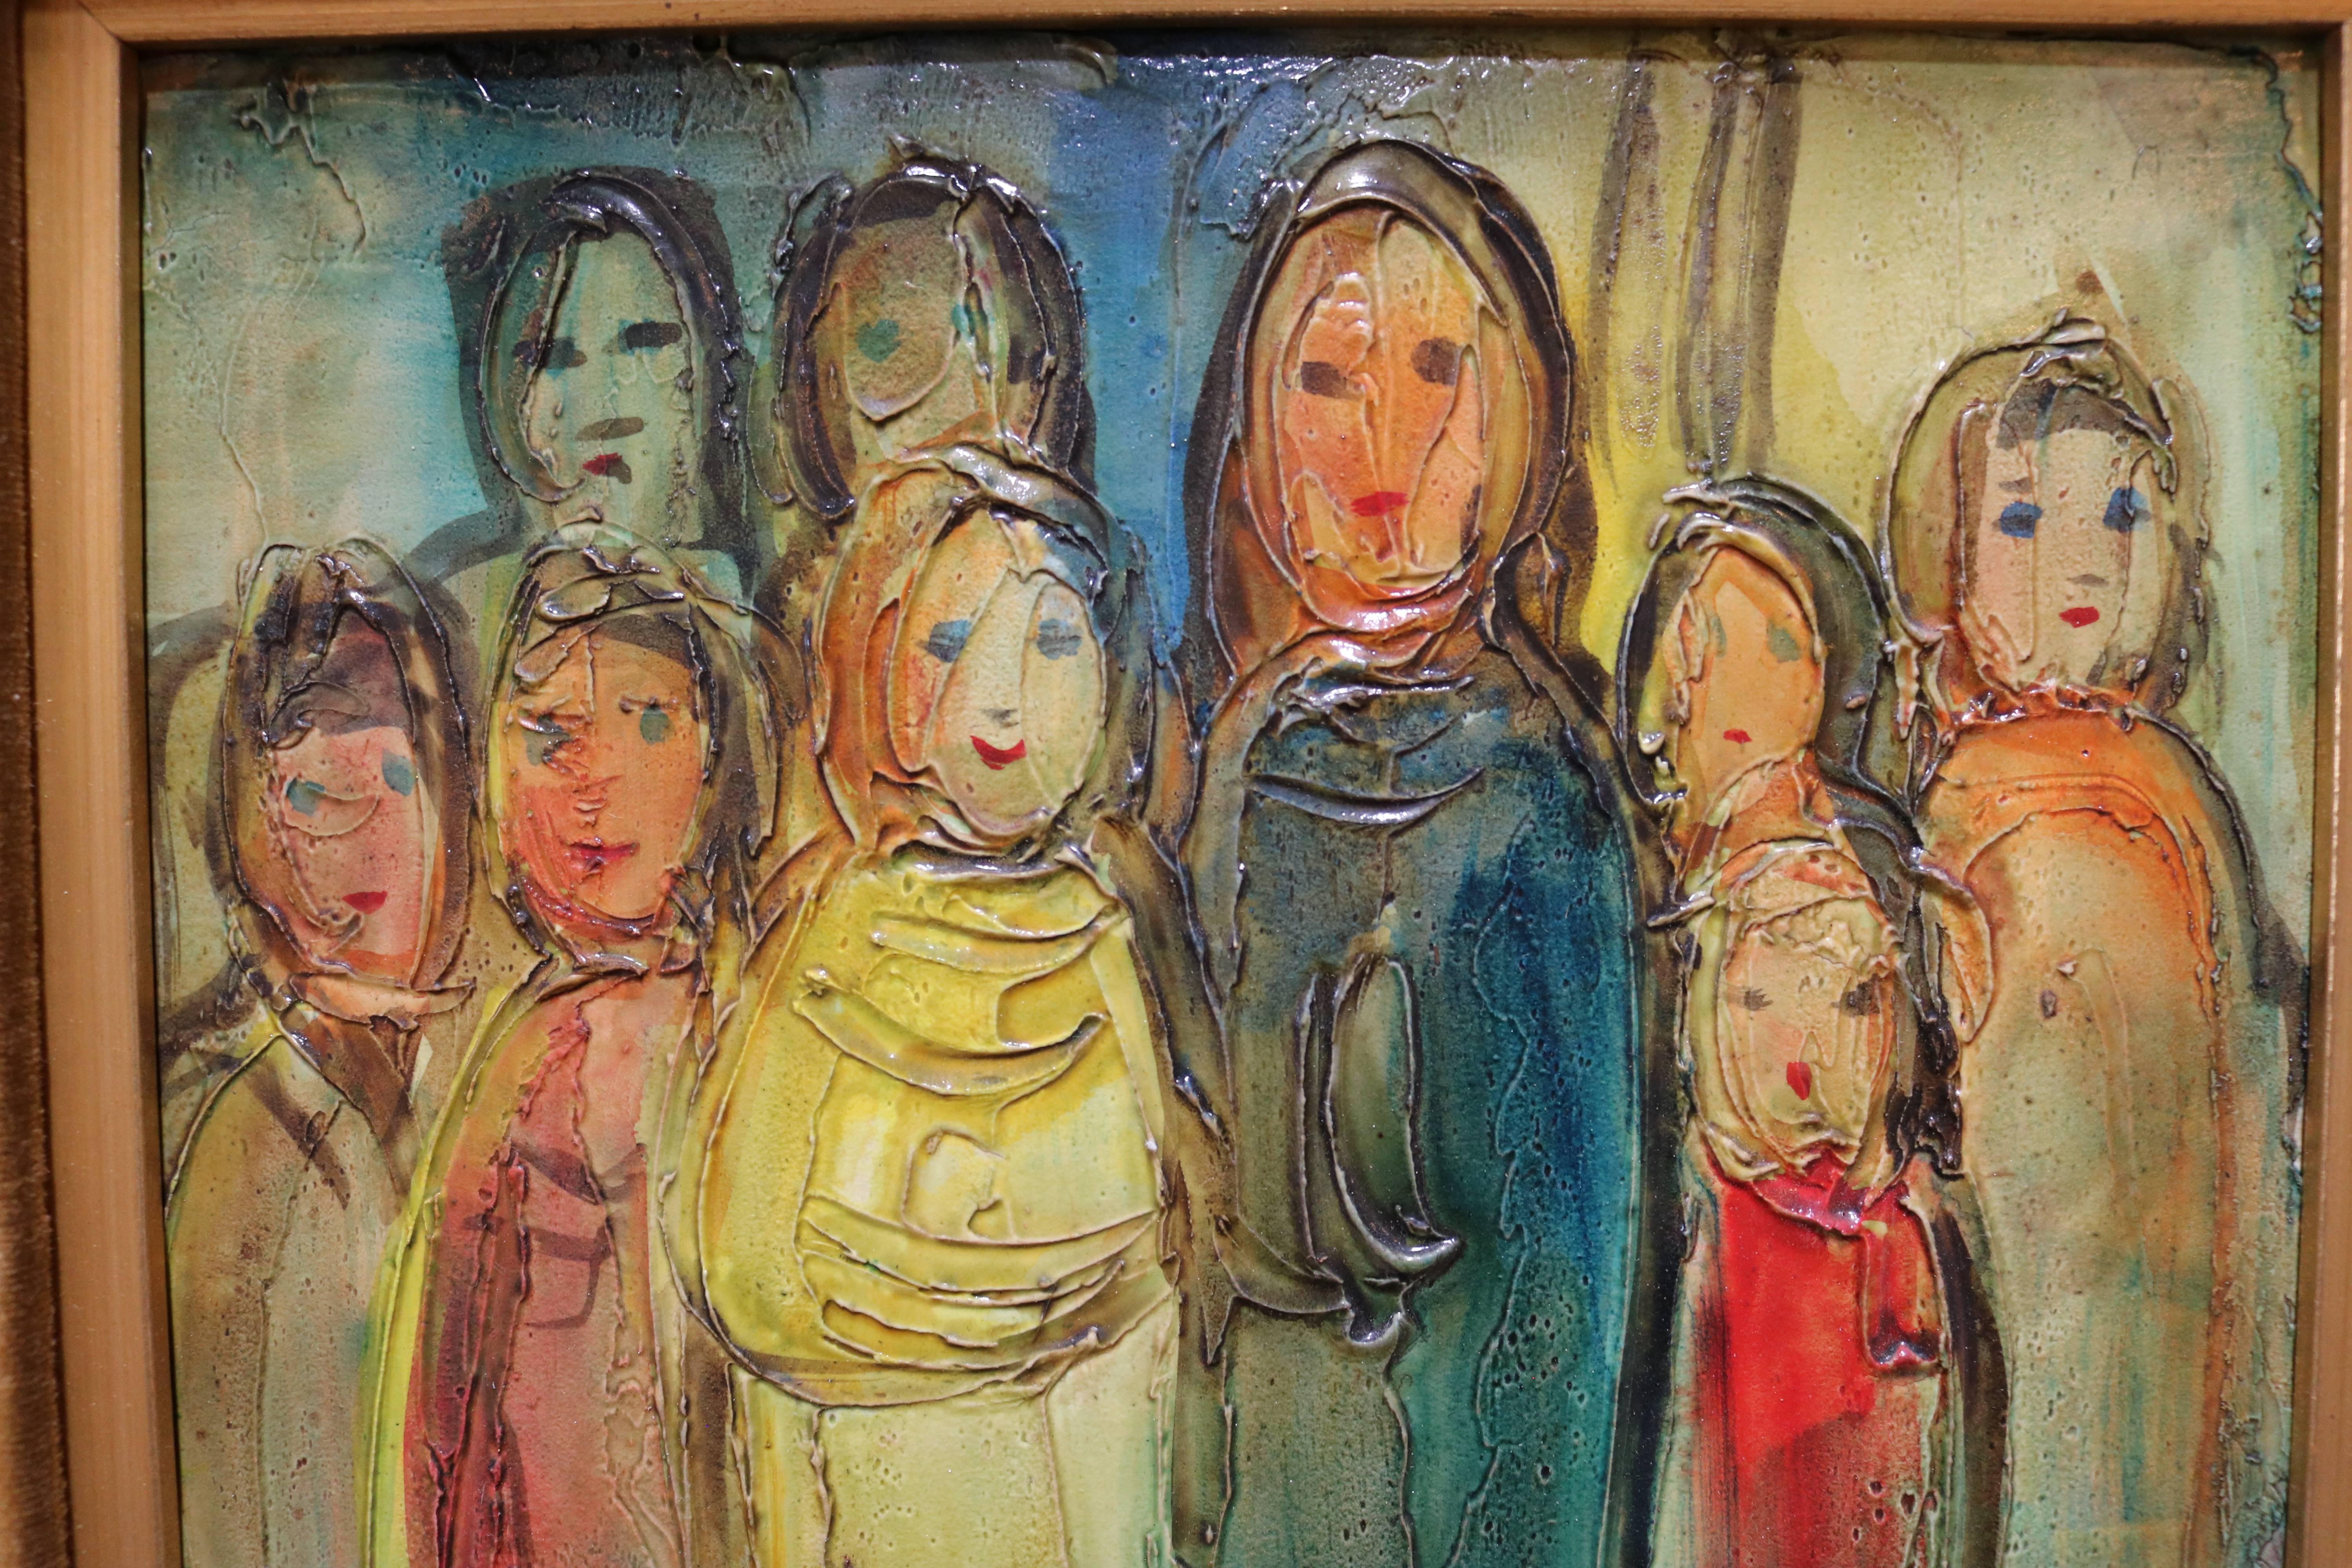 This colorful oil painting on board by Viola M. Allen depicts a group of standing women and girls. 

Viola M. Allen was born on Long Island, New York and studied at the Pratt Institute. She had a commercial art studio in Malibu for many years and